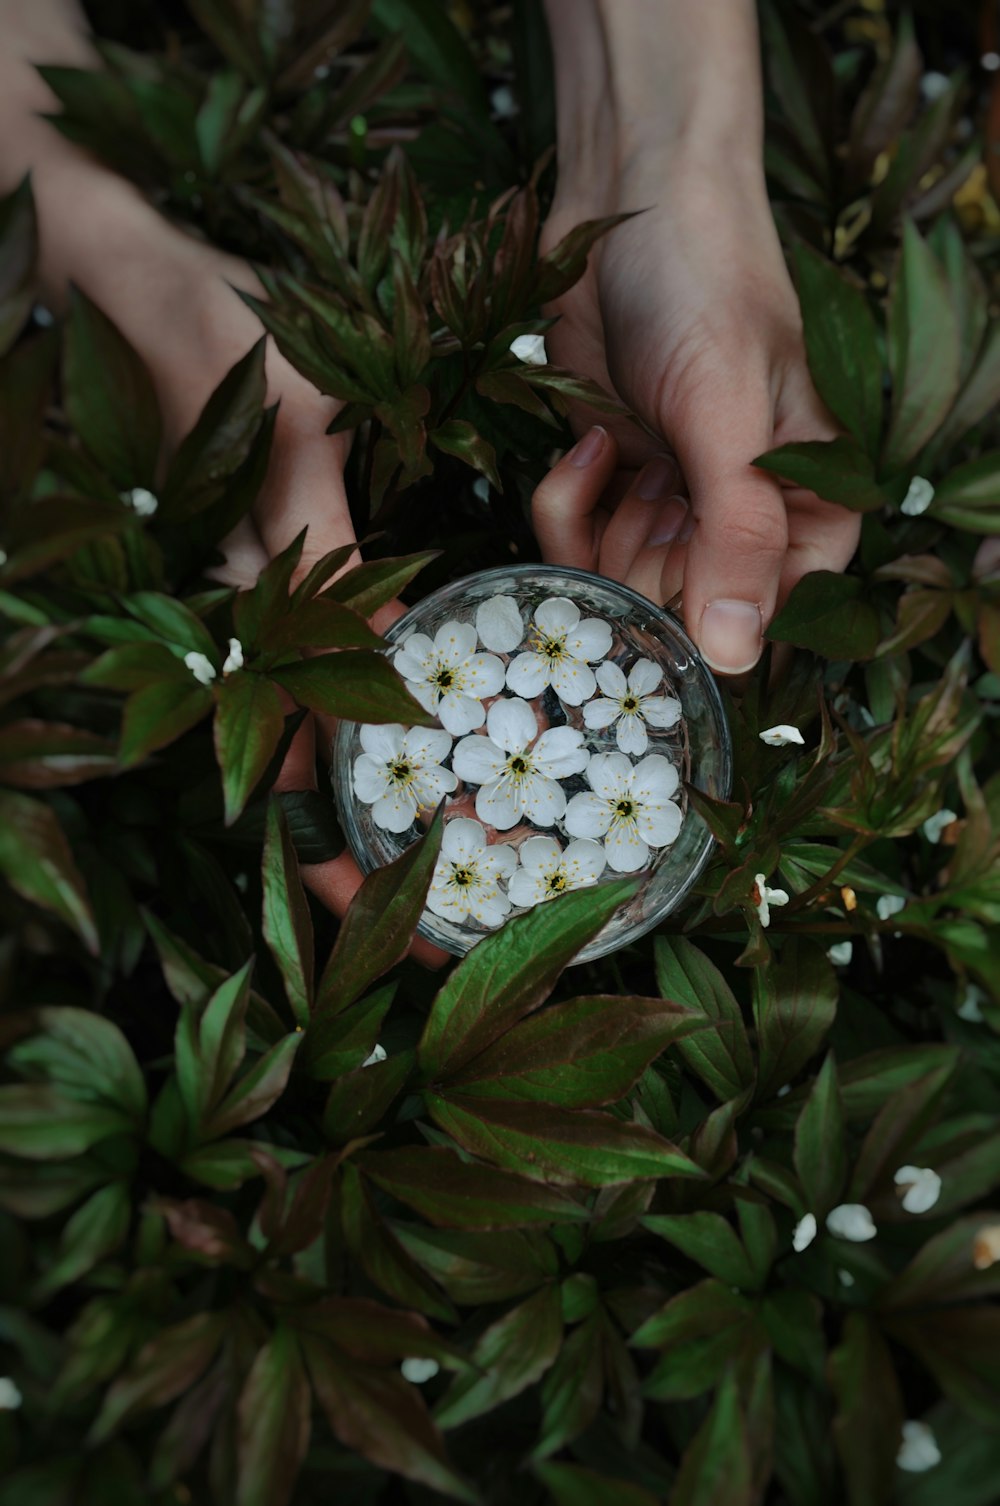 a person holding a bowl filled with white flowers